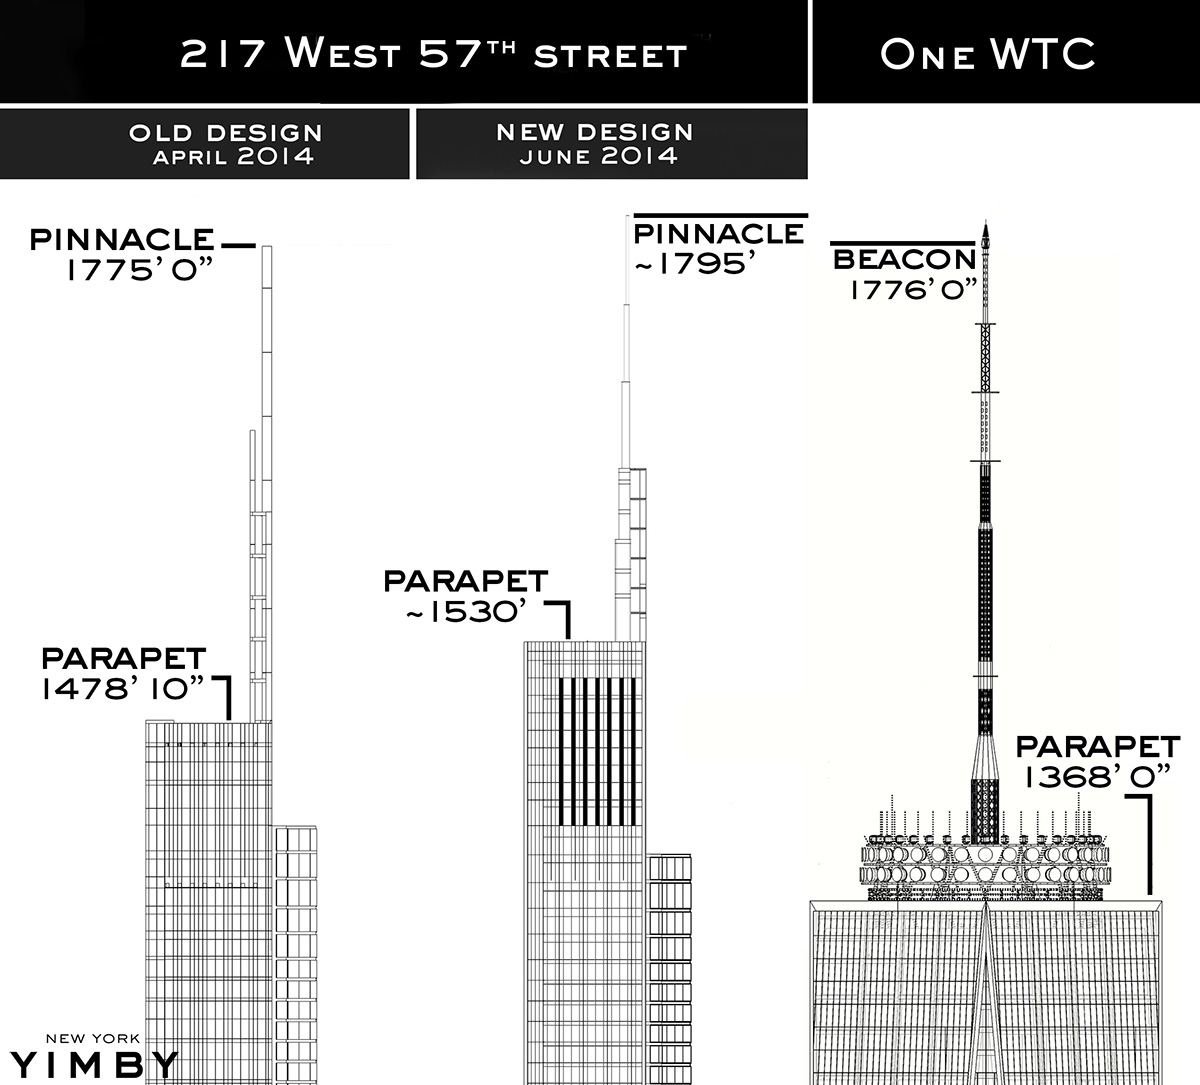 217 West 57th Street and One World Trade Center